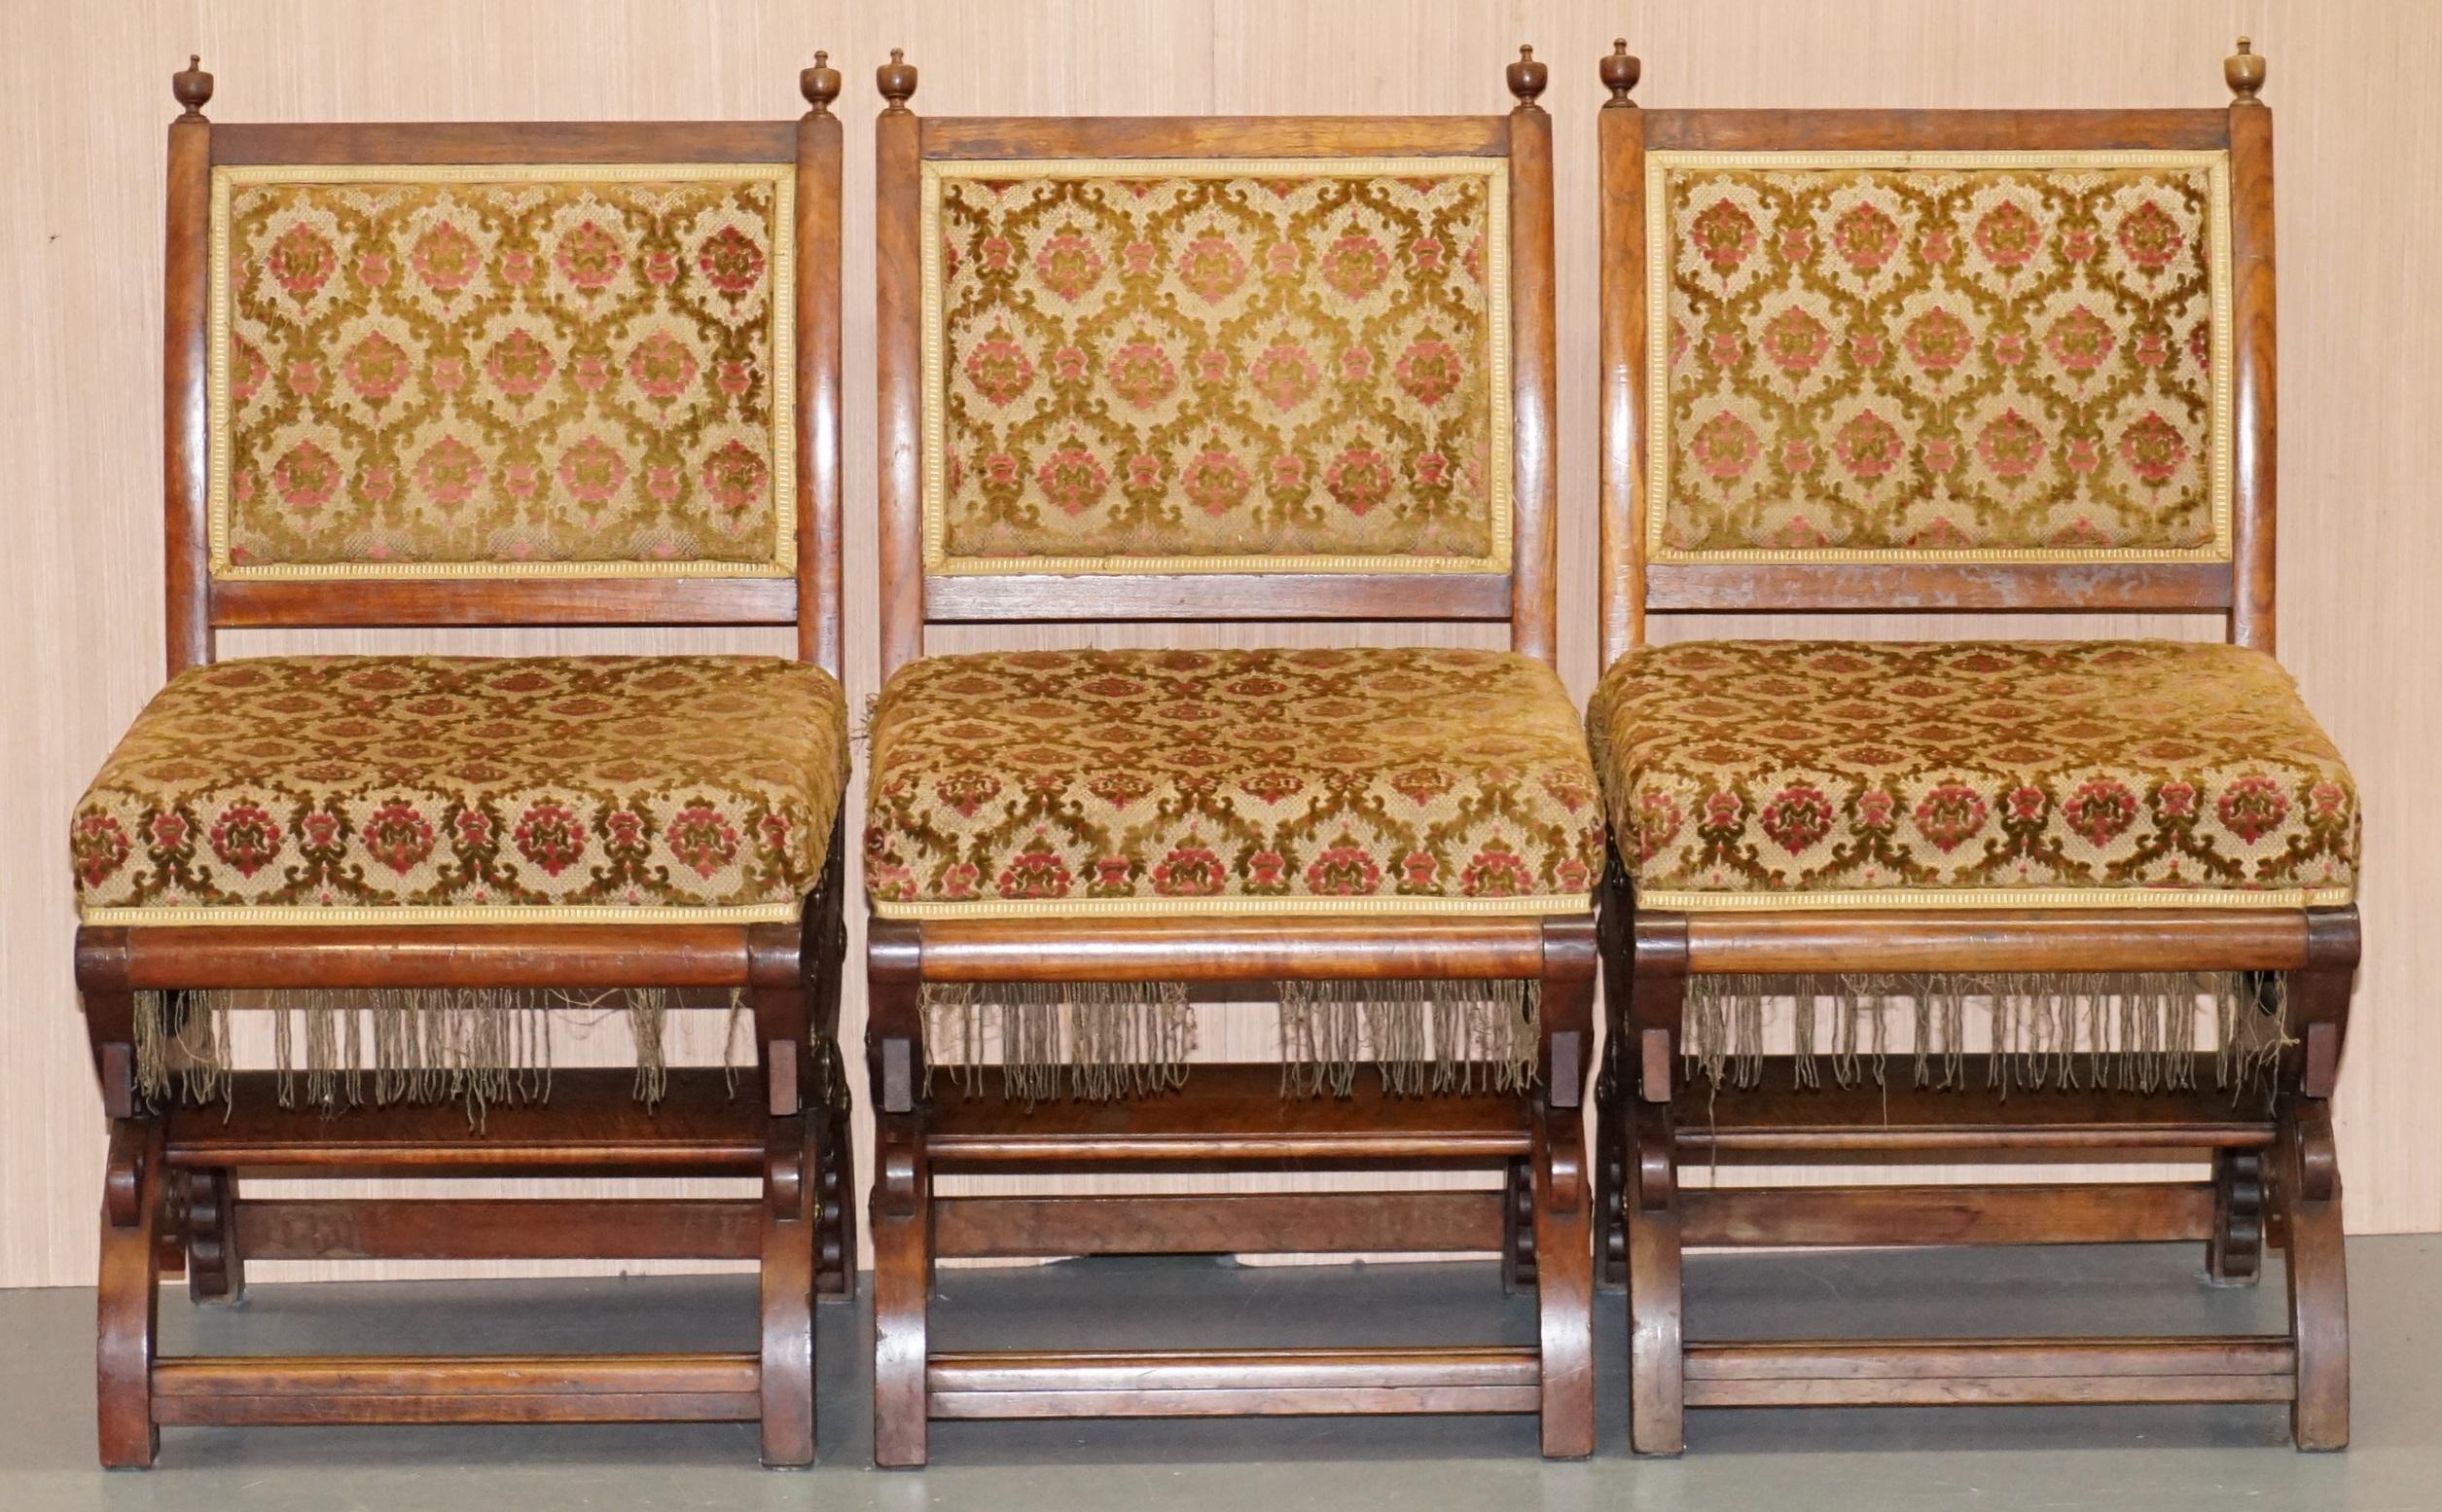 We are delighted to offer for sale this stunning set of six beautifully carved from solid Walnut with Gold Gilt metal fittings Gothic Revival chairs

A very good looking, comfortable and highly decorative set of chairs, these date to late